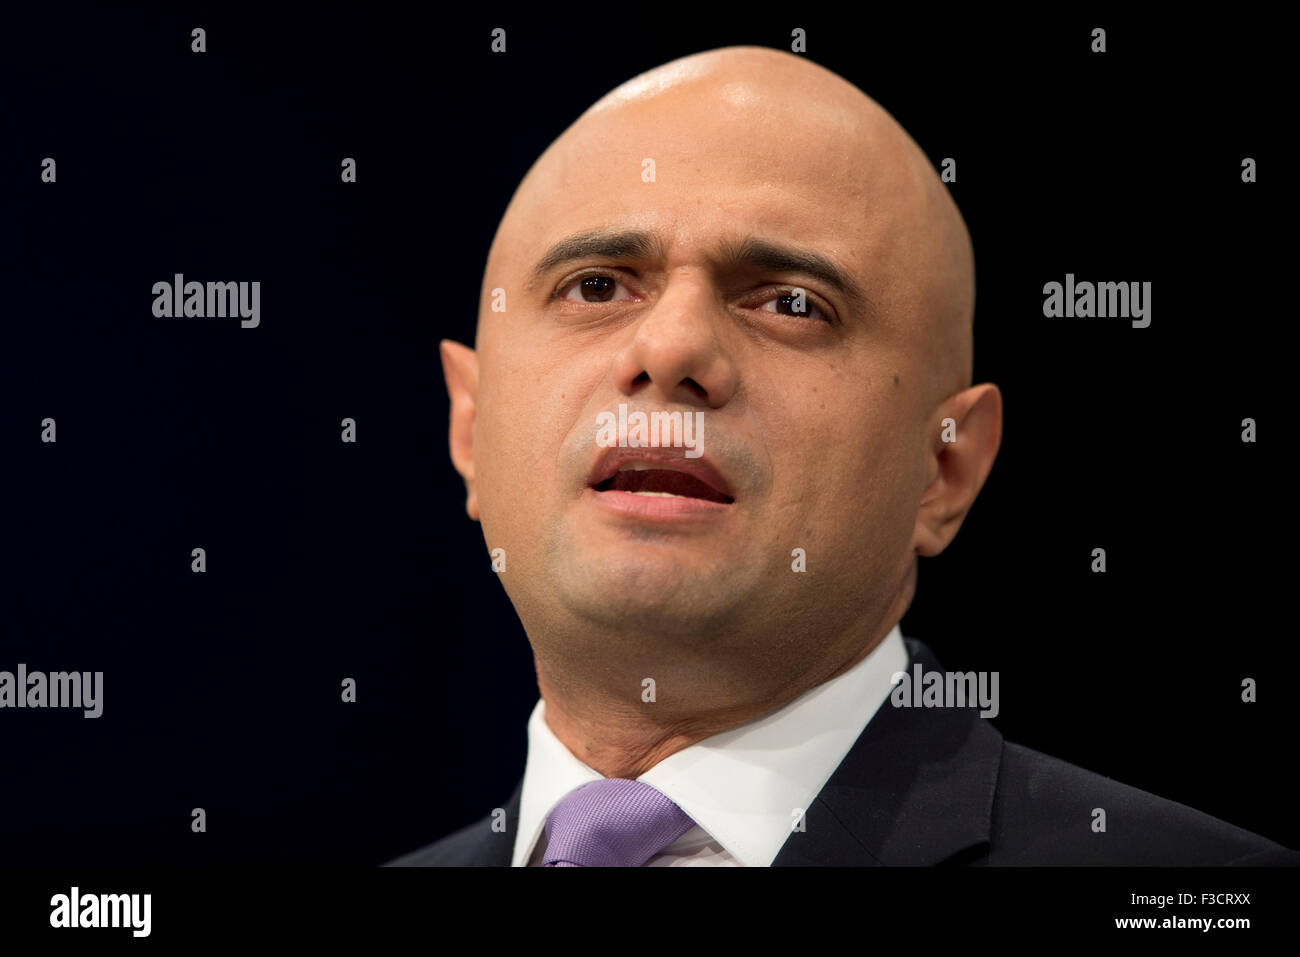 Manchester, UK. 5th October 2015. The Rt Hon Sajid Javid MP, Secretary of State for Business, Innovation and Skills and President of the Board of Trade speaks at Day 2 of the 2015 Conservative Party Conference in Manchester. Credit:  Russell Hart/Alamy Live News. Stock Photo